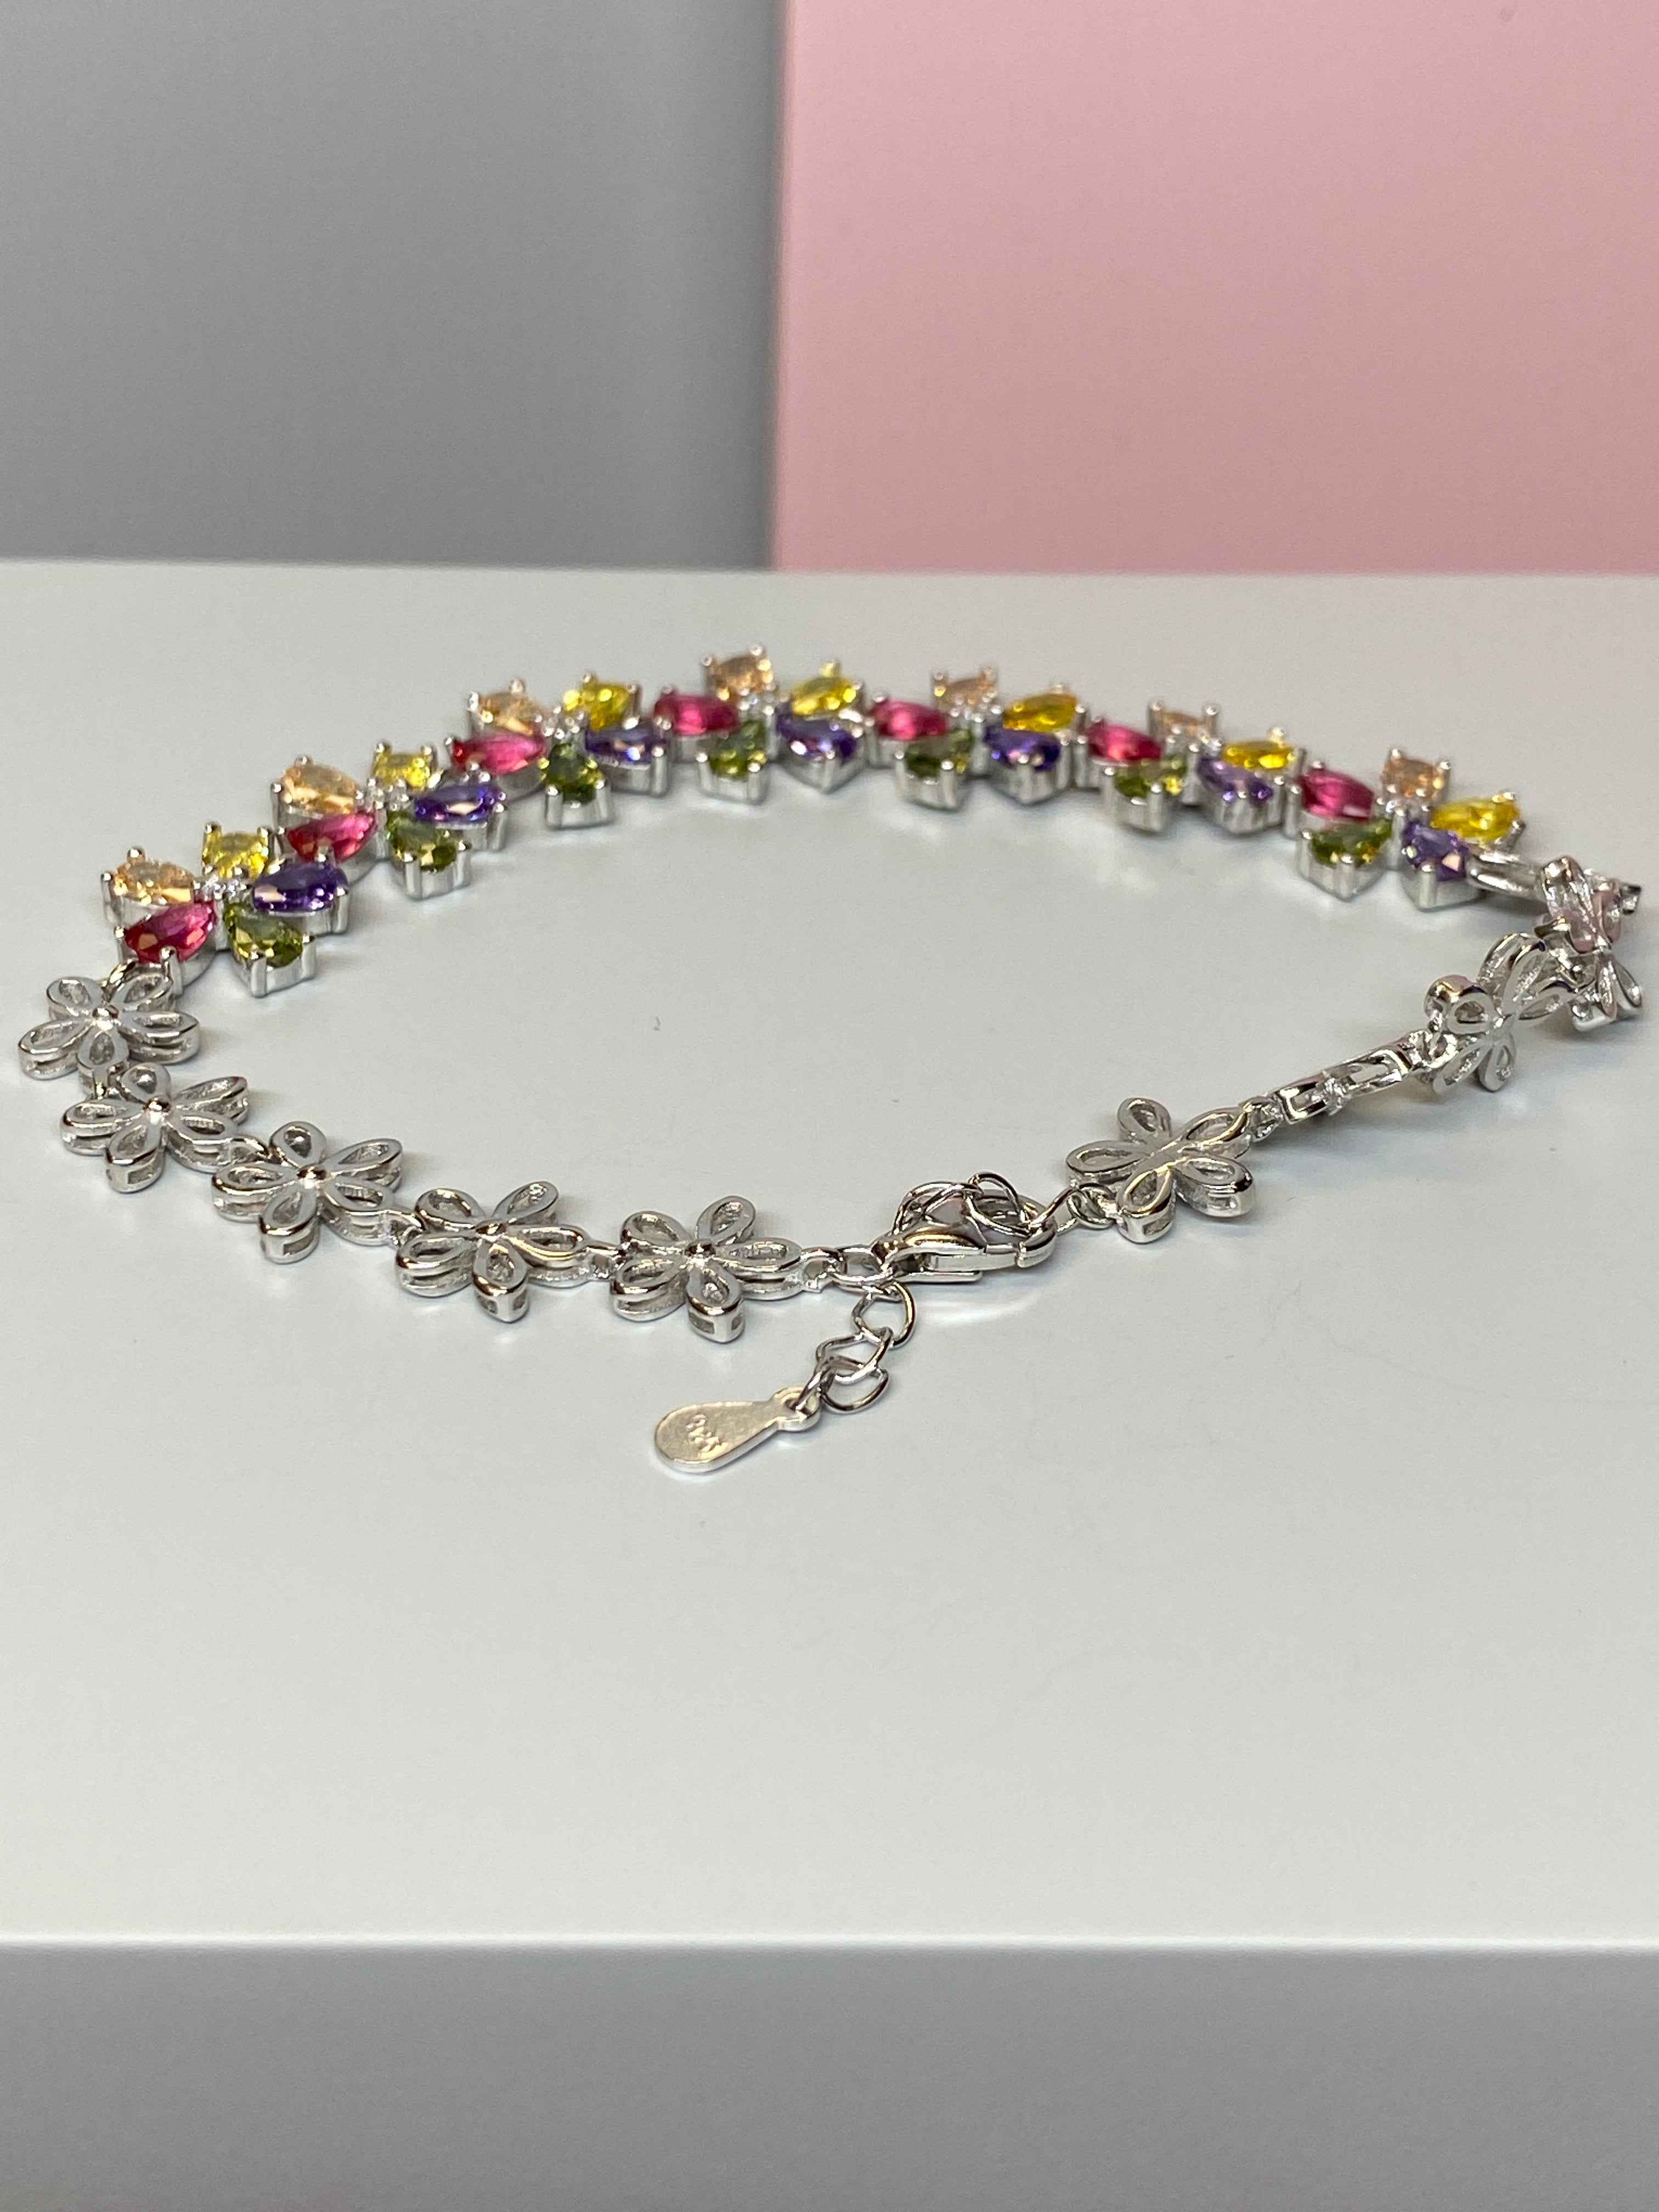 Silver Multicoloured Flower Bracelet - Hallmark Jewellers Formby & The Jewellers Bench Widnes